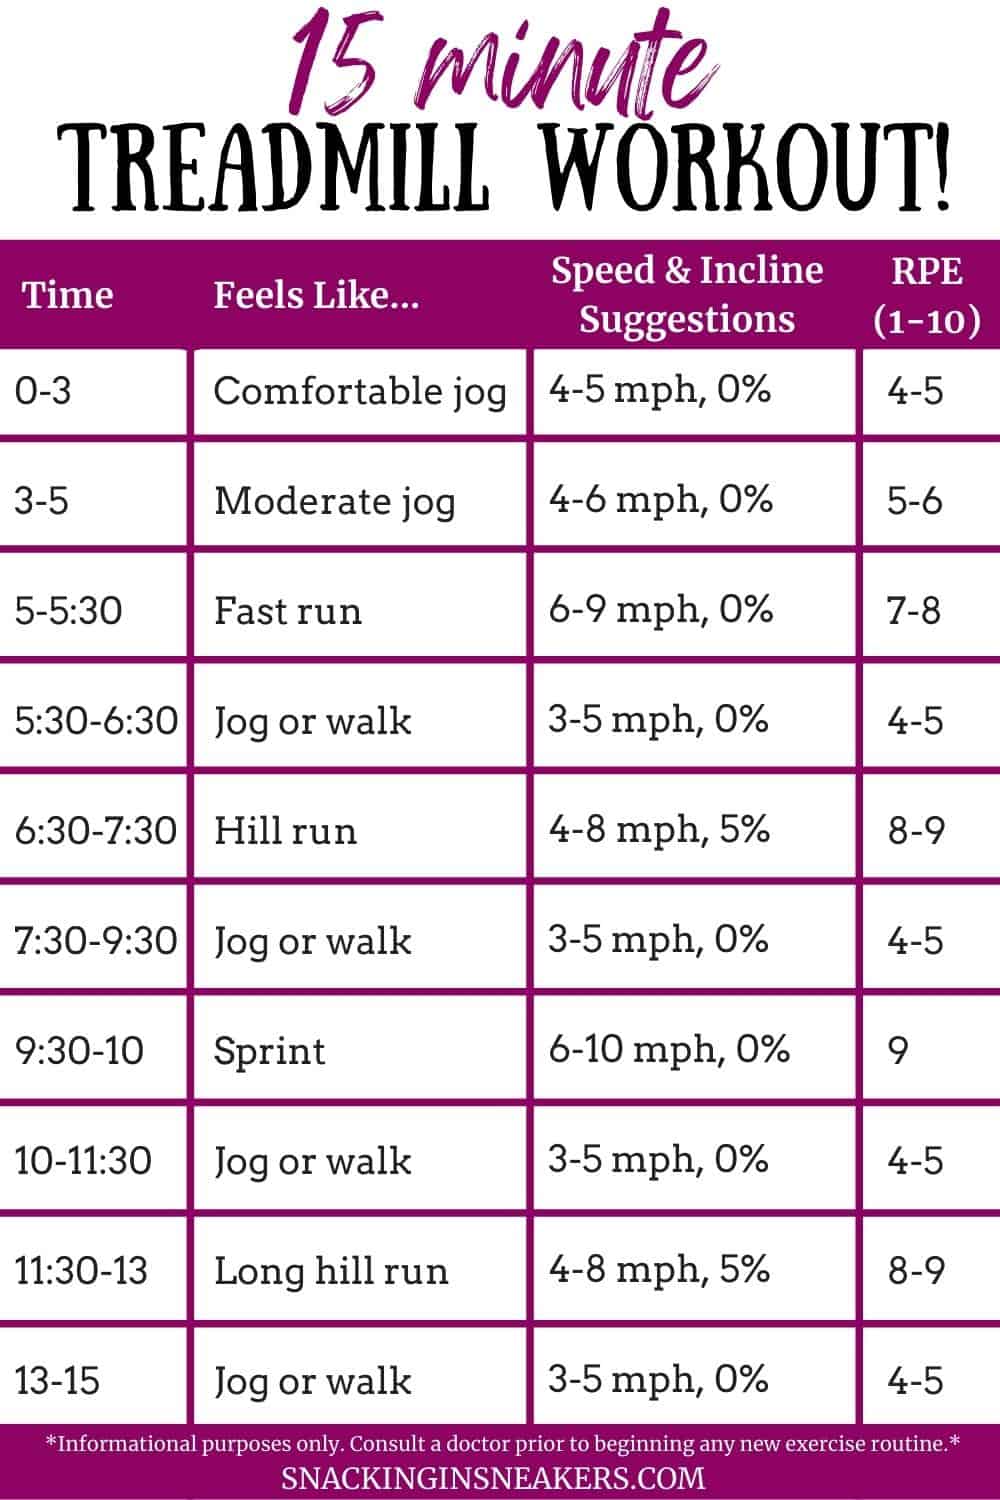 A chart of a 15 minute treadmill workout with intervals and speeds.